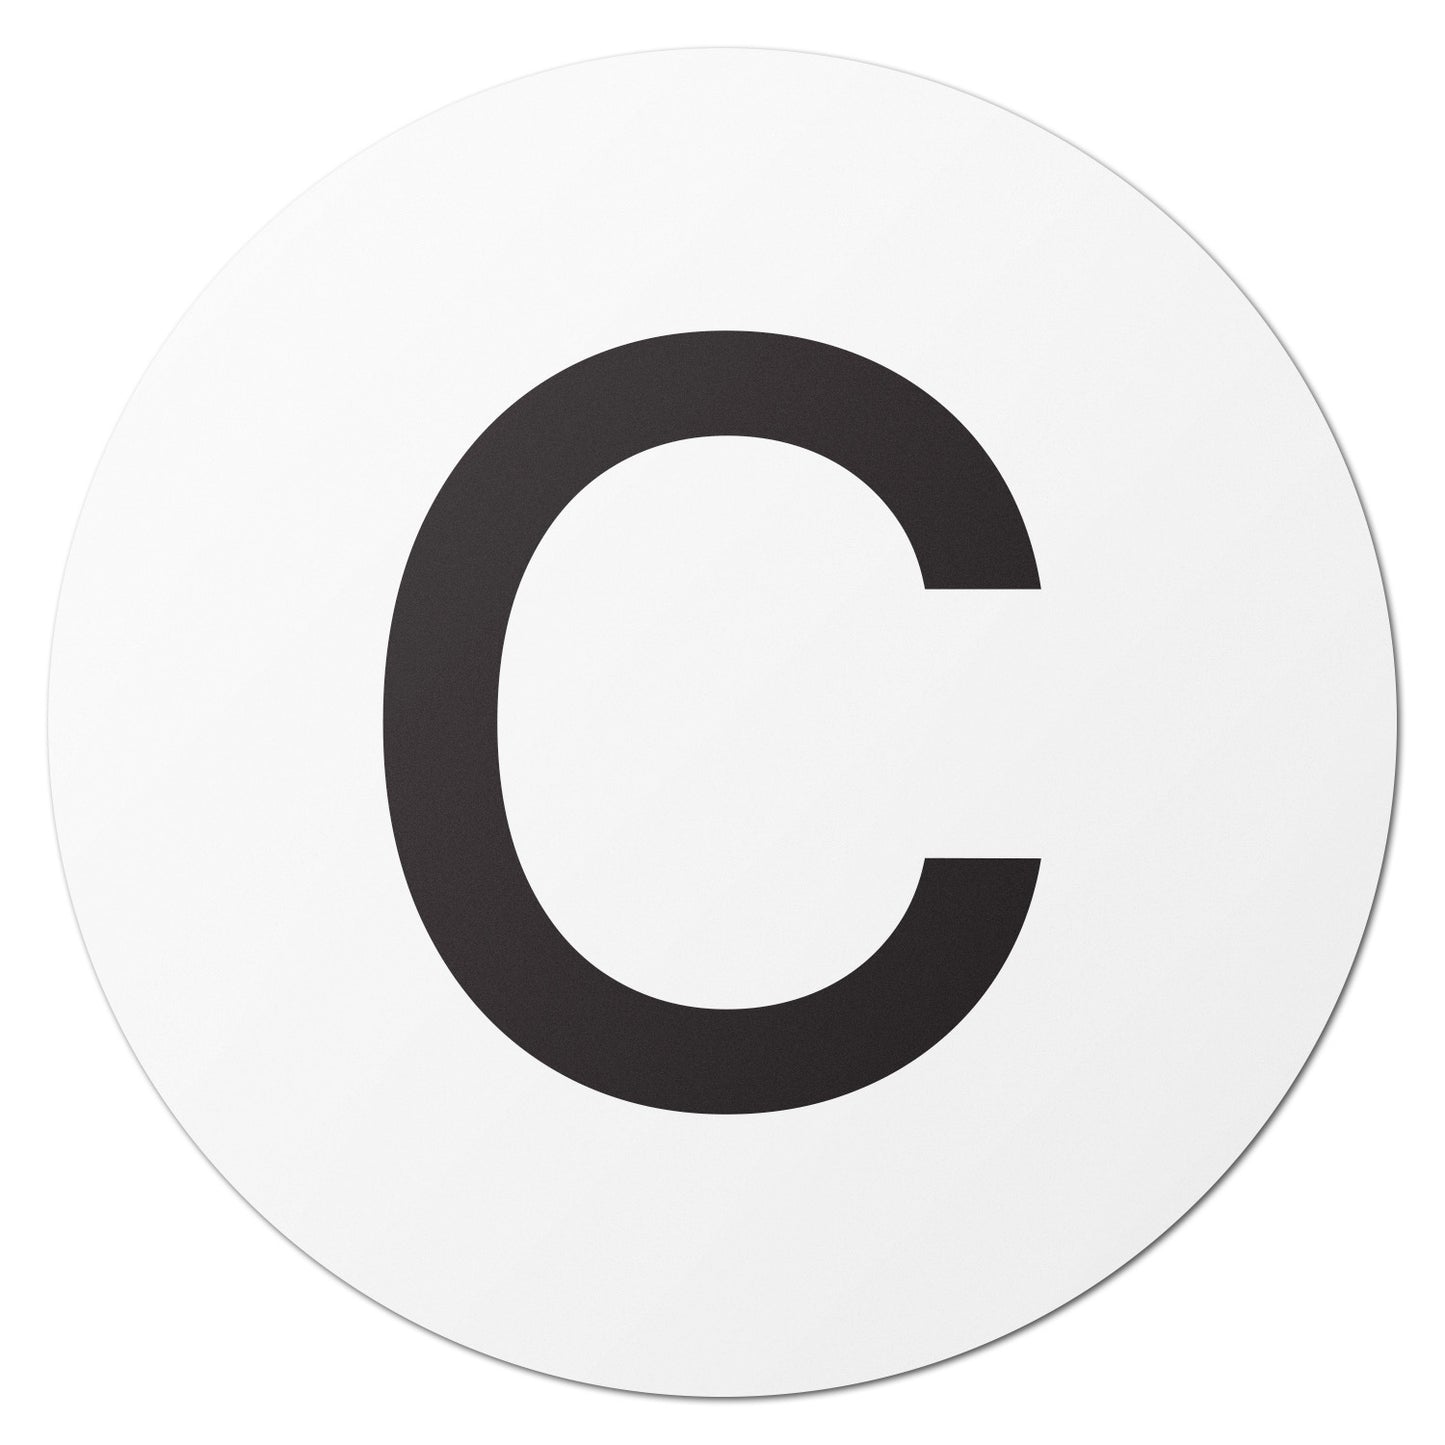 1.5 inch | Inventory: Capital Letter C Labels